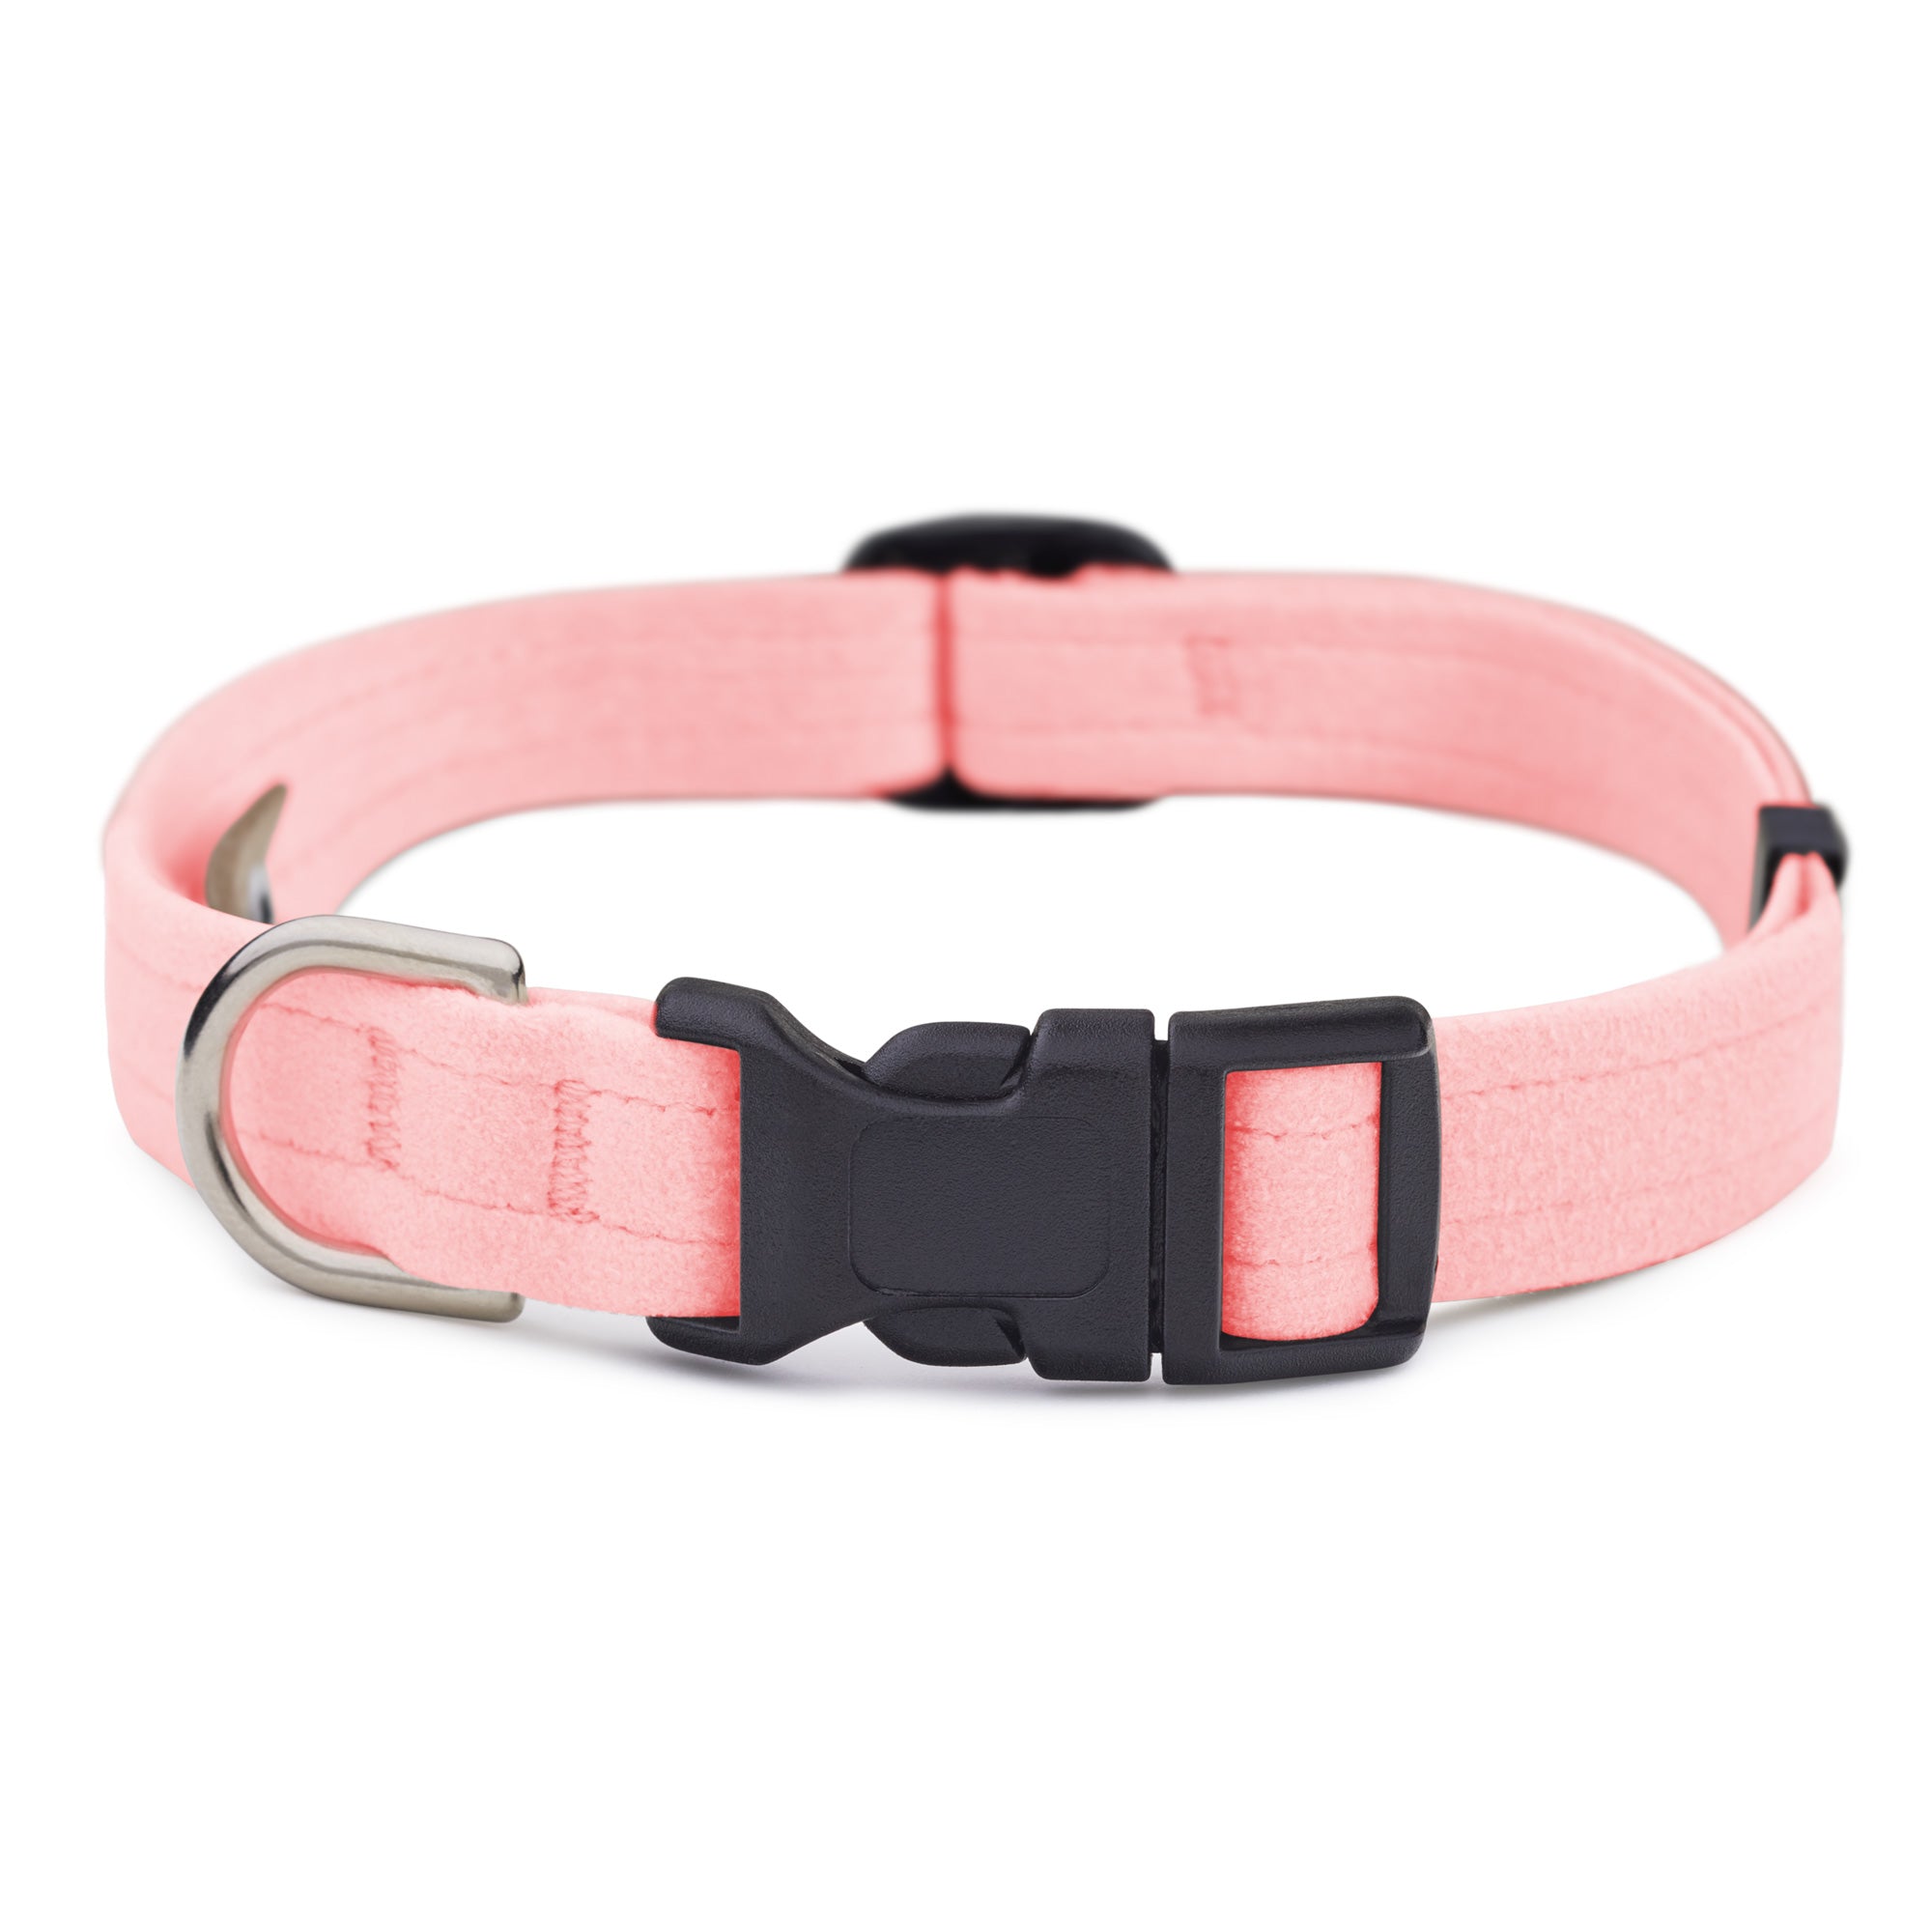 VIILOCK Soft Webbing Pink Dog Collar, Cute Puppy Collars for Small Puppies  Dogs (Bubble Pink, M)